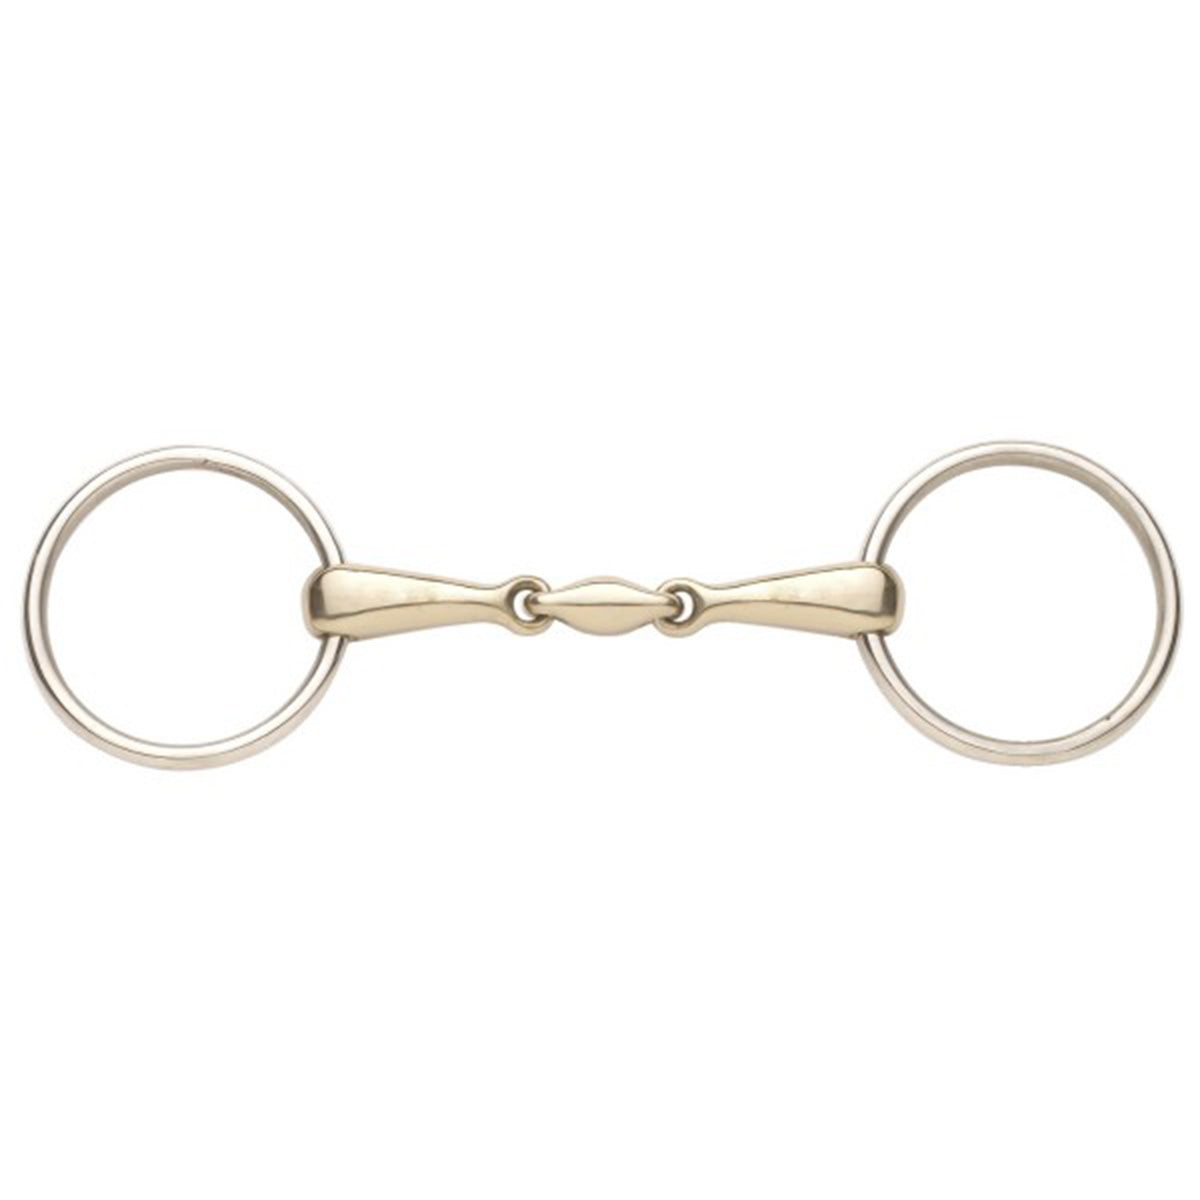 Ovation Elite German Silver Mouth Snaffle with Stainless Steel Rings